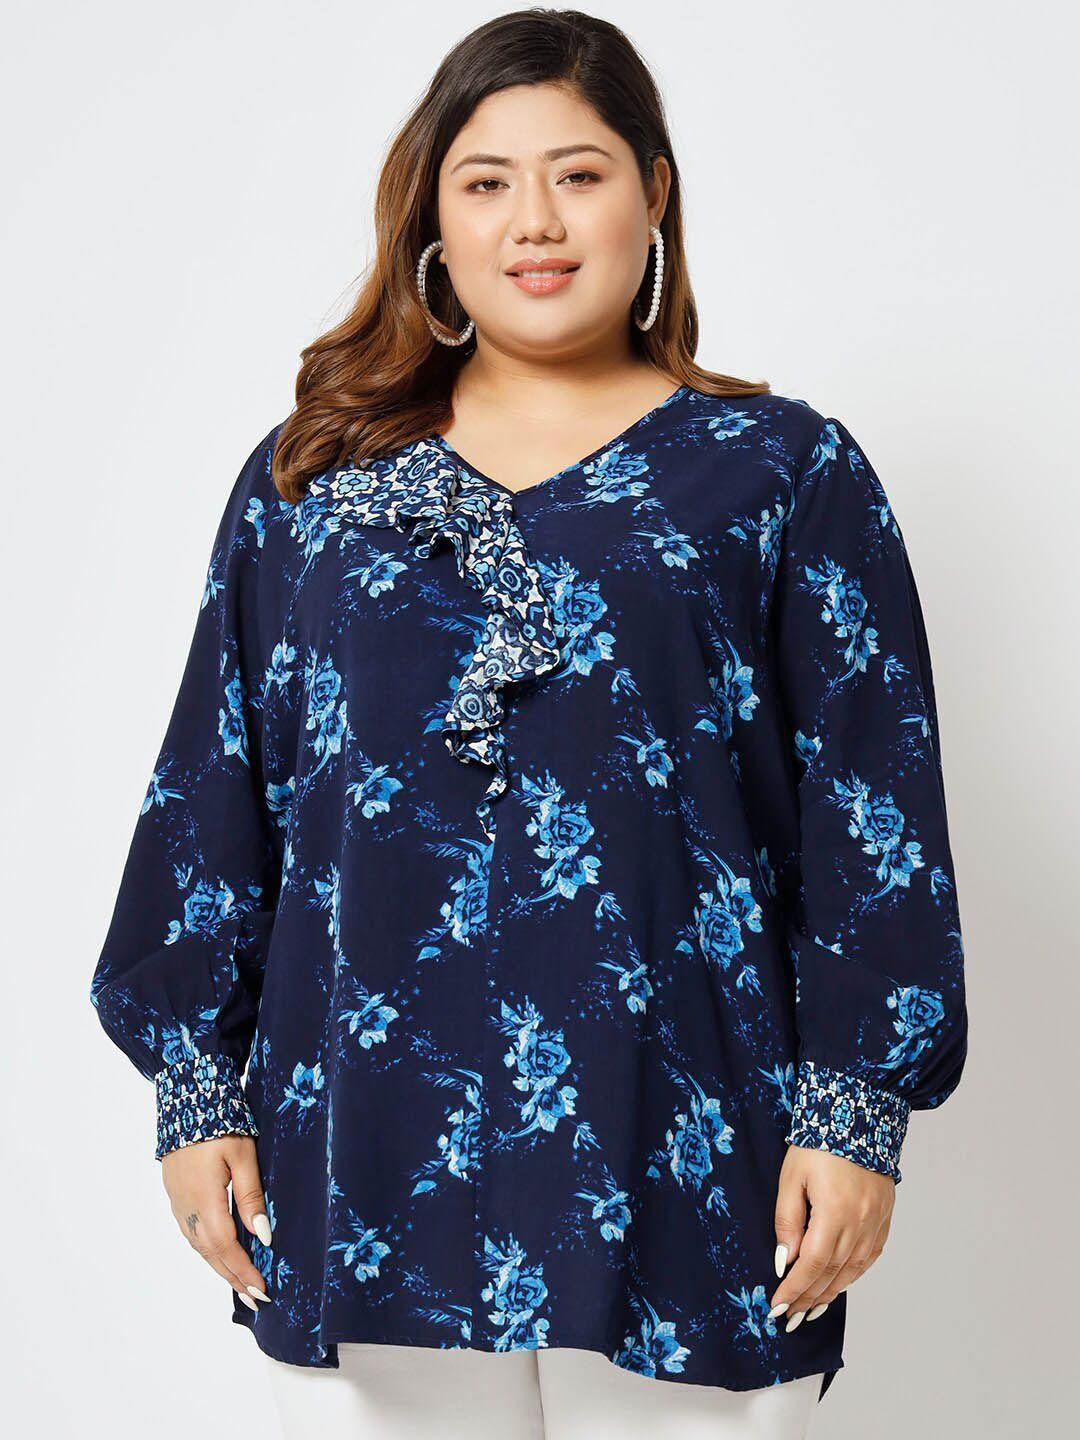 here&now blue floral print top